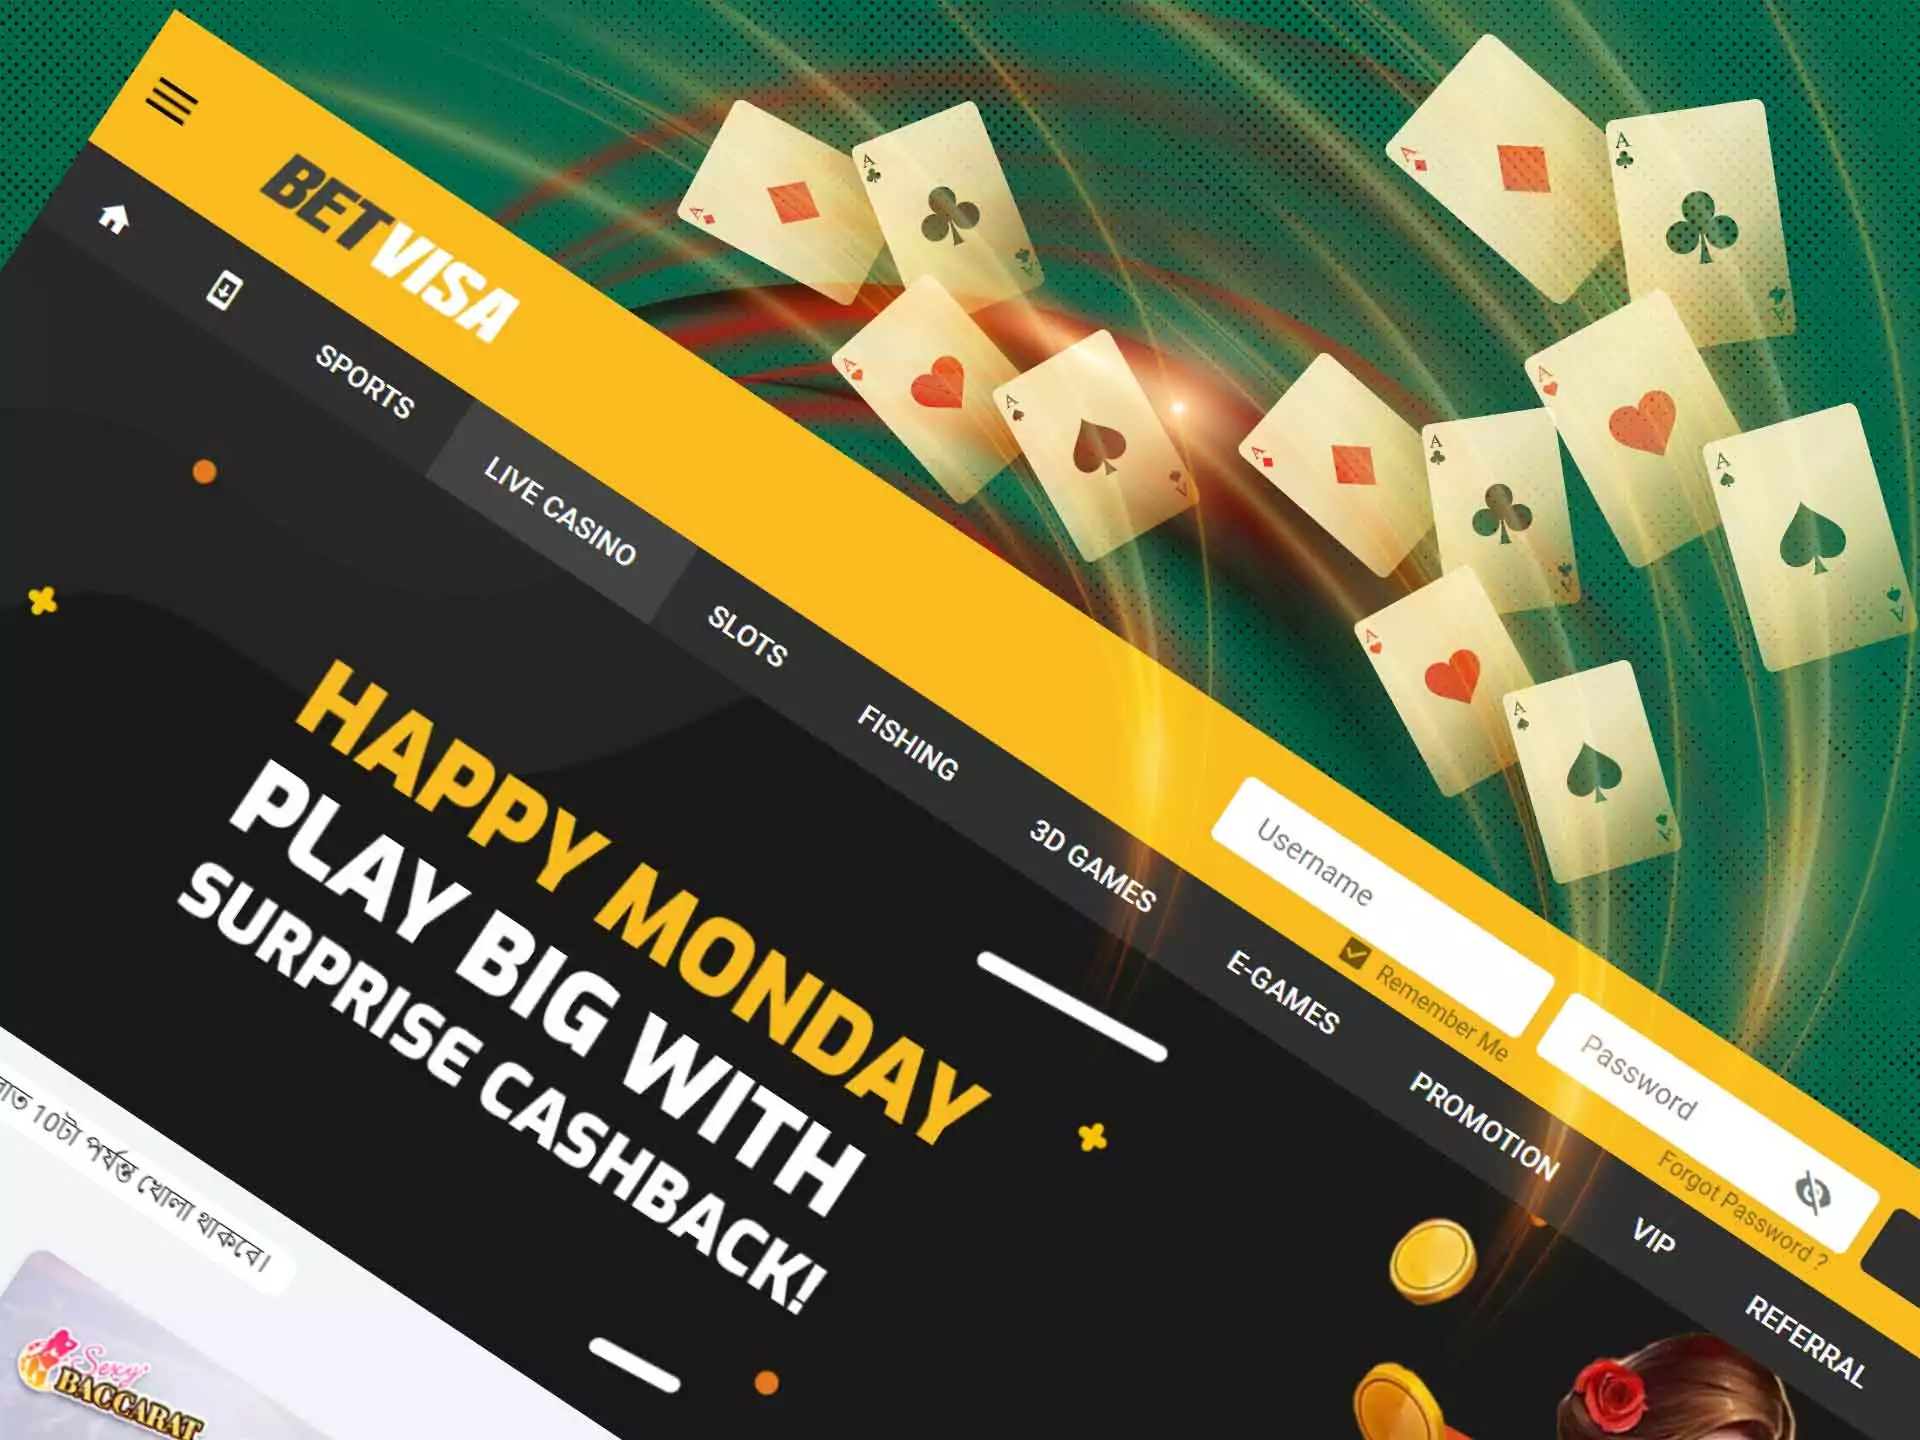 You will find all the most popular casino games in the Betvisa application.